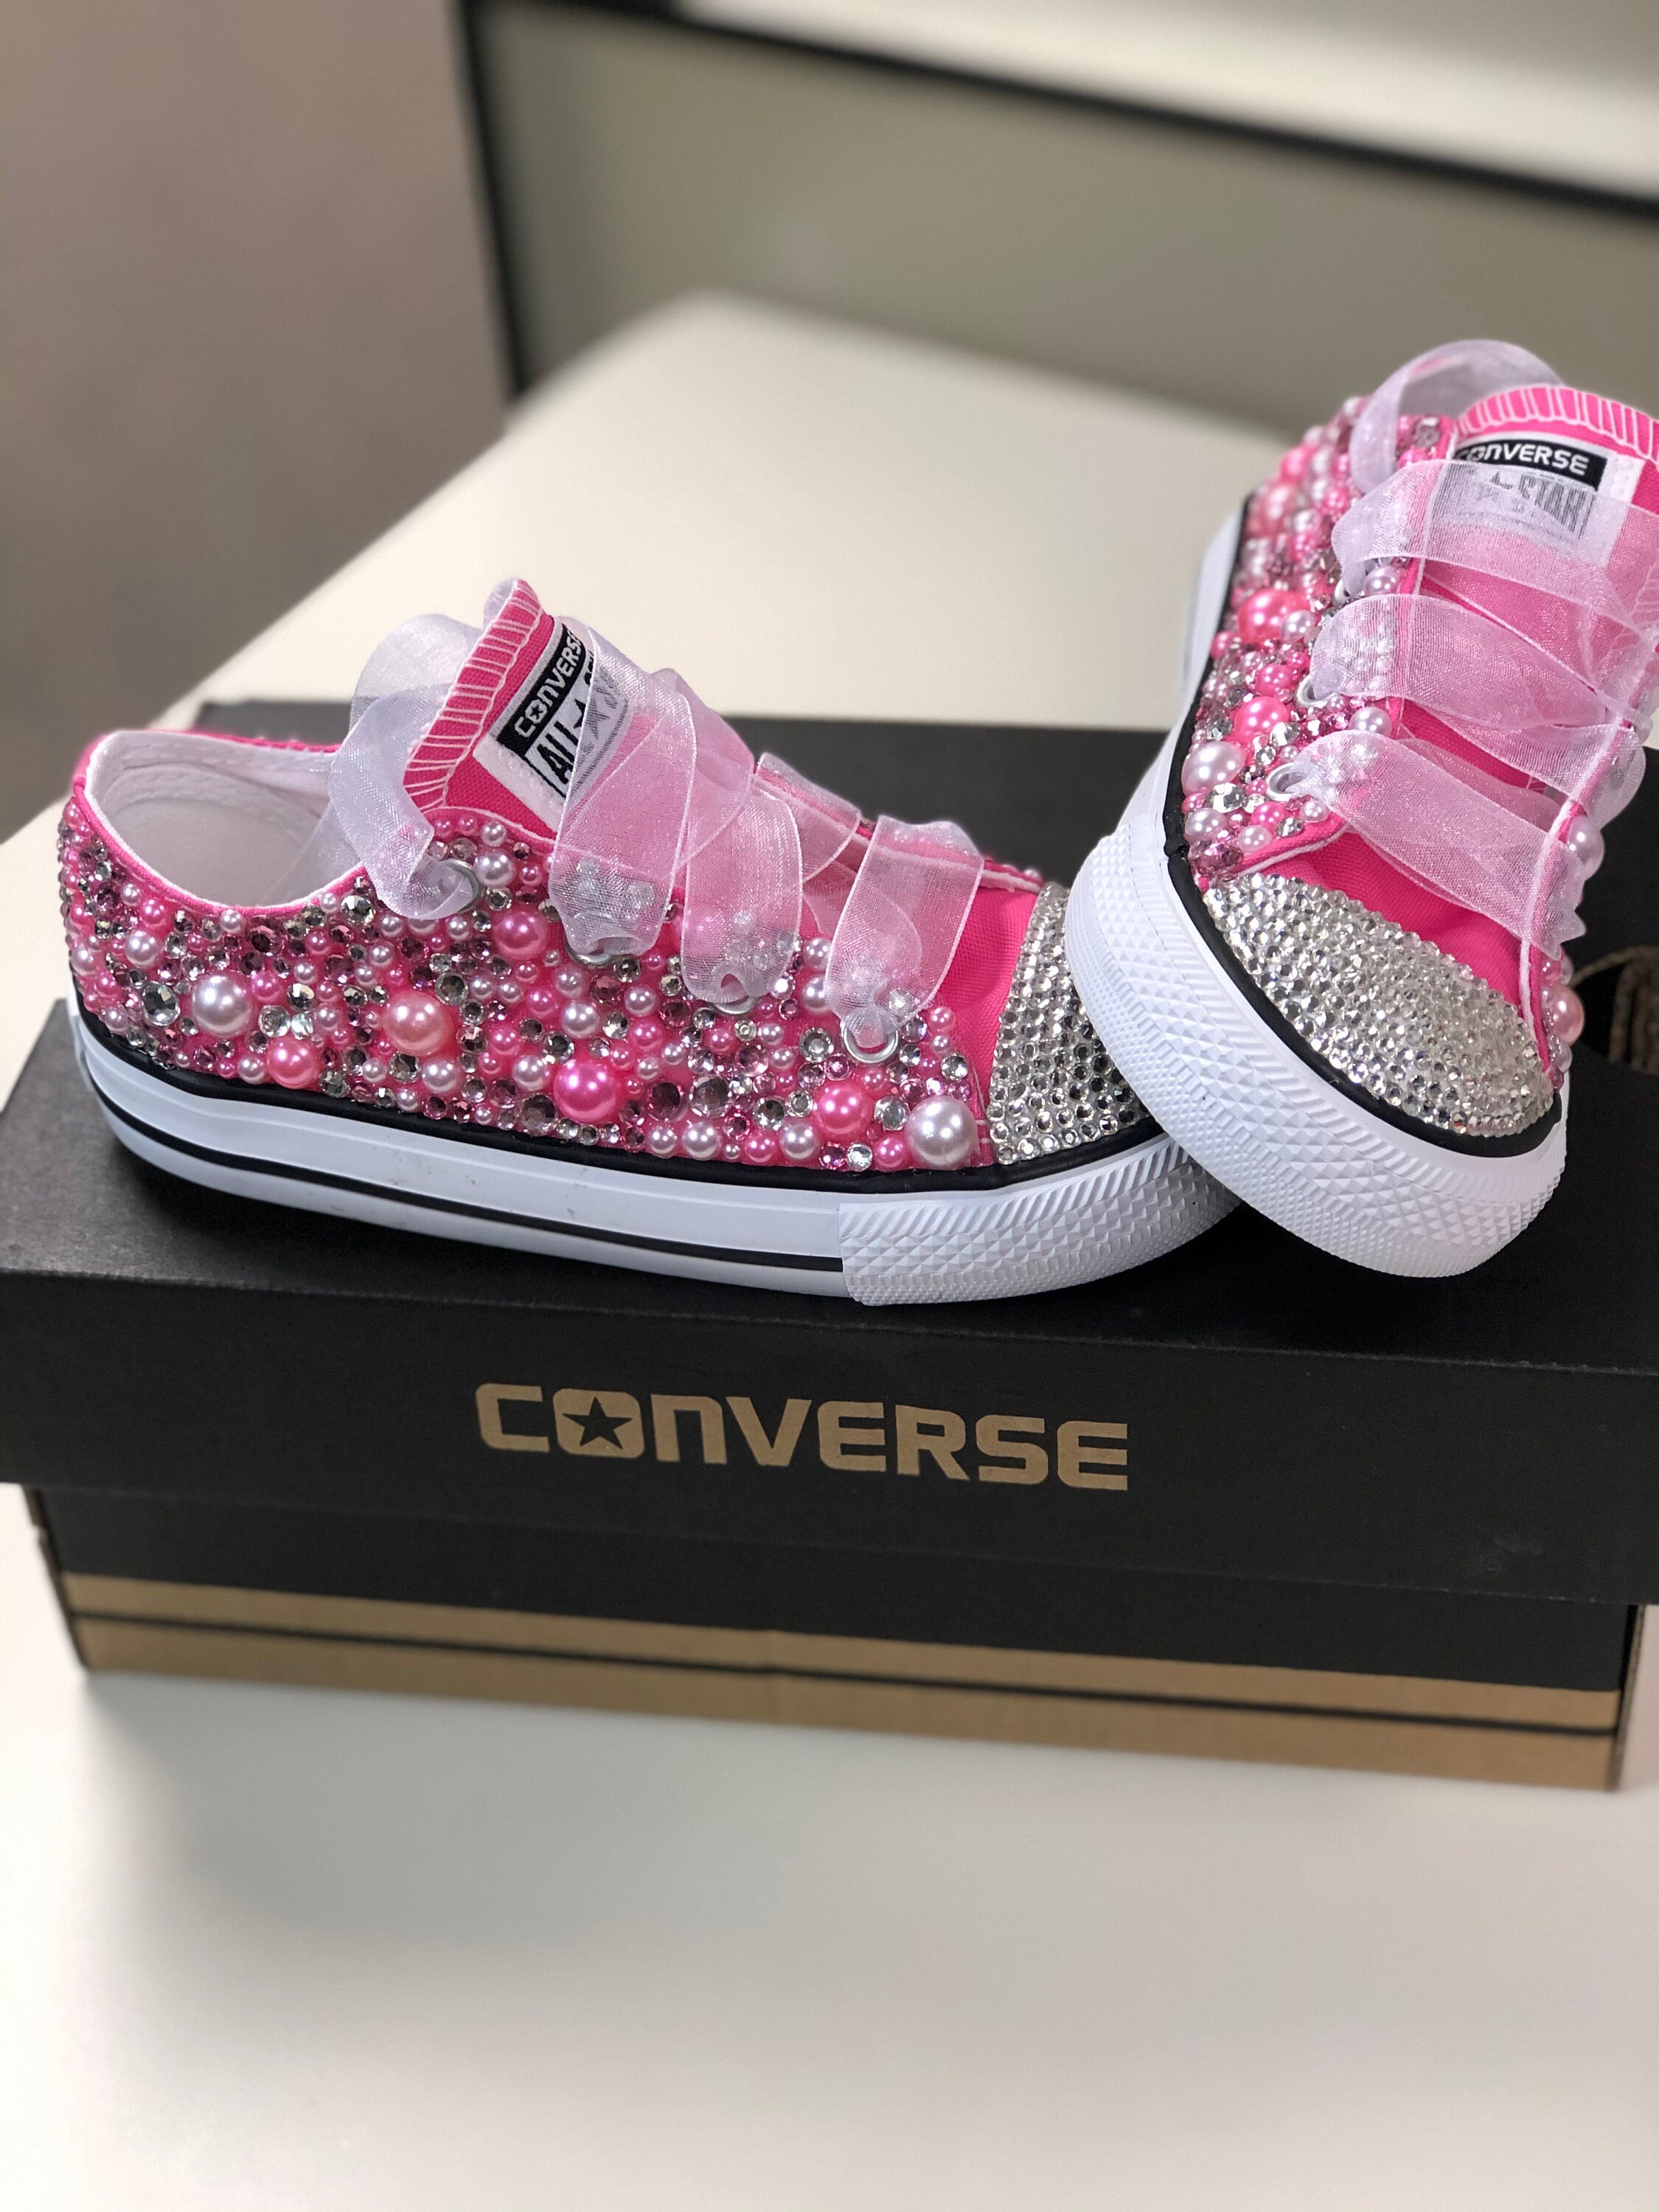 All-star Low Top Pink Girl Converse Bling Converse Birthday - Etsy